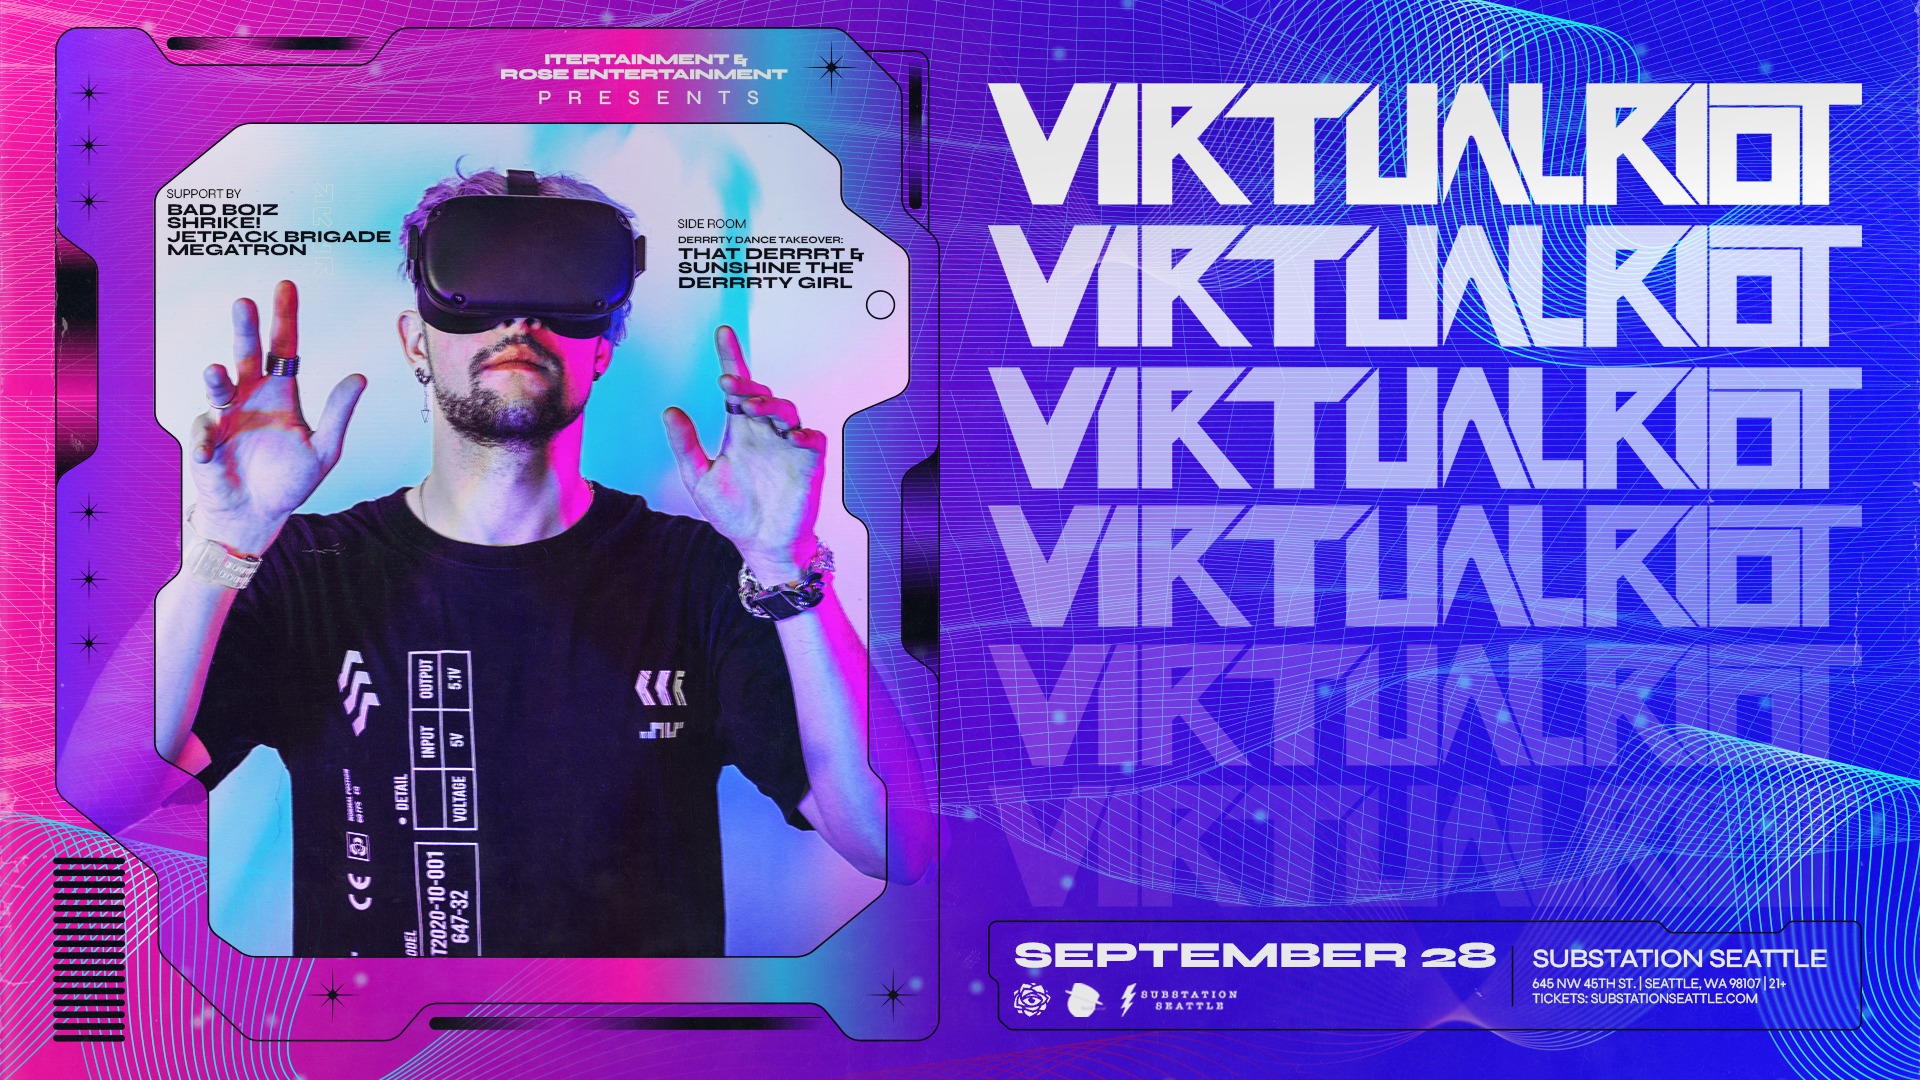 Virtual RIot event poster for upcoming Substation show with pinkpurple background